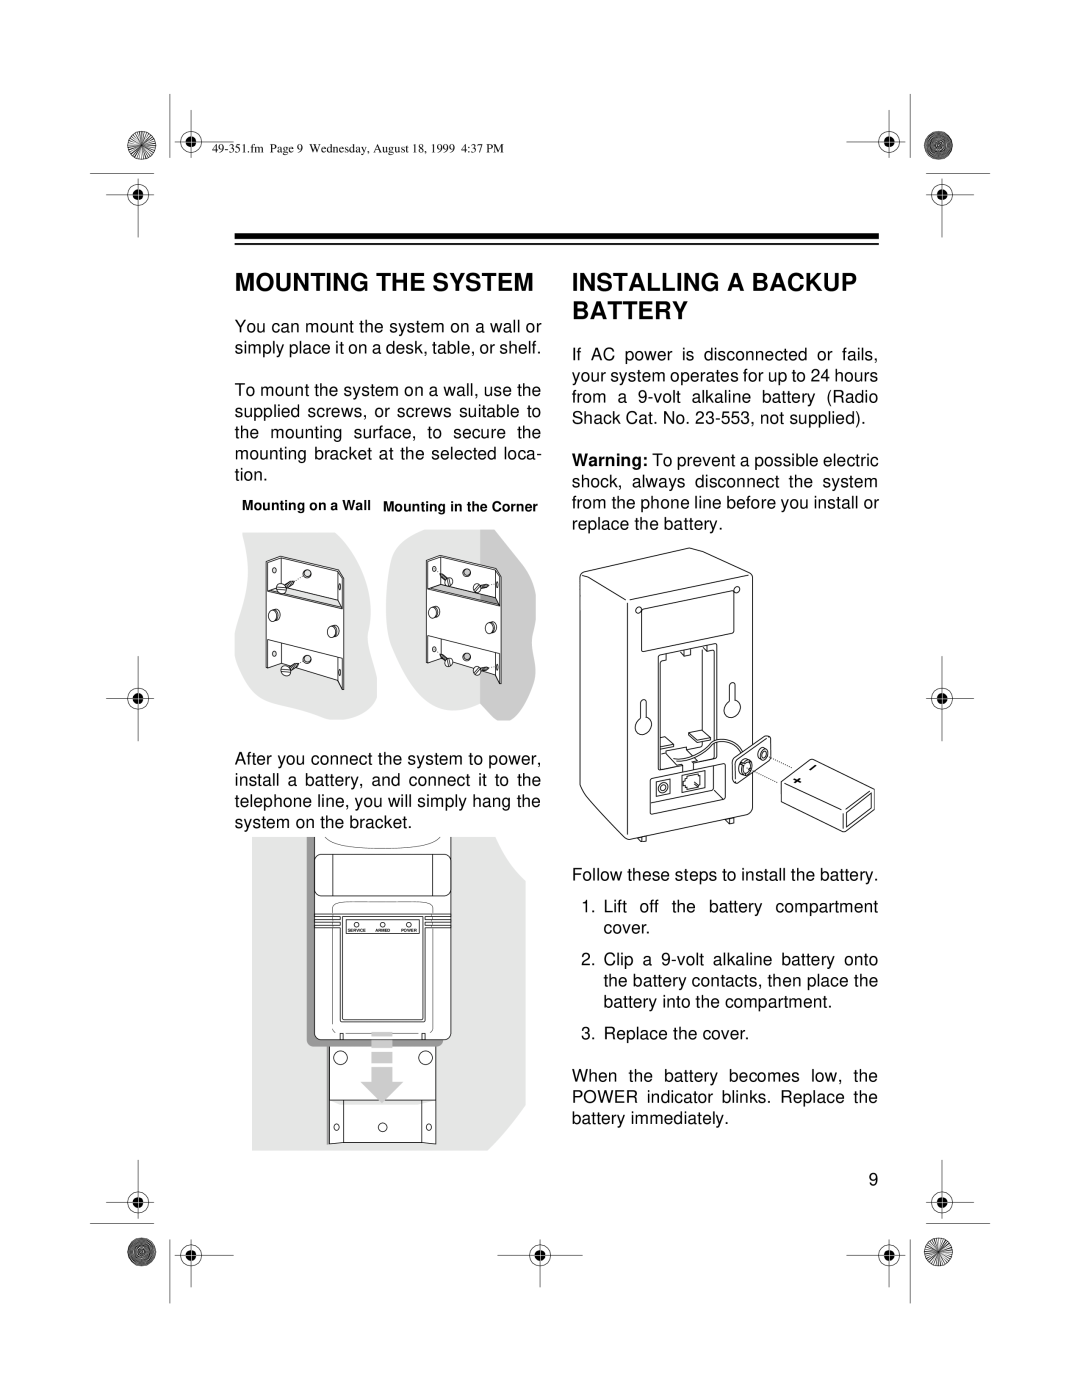 Radio Shack 49-351 owner manual Mounting The System, Installing A Backup Battery 